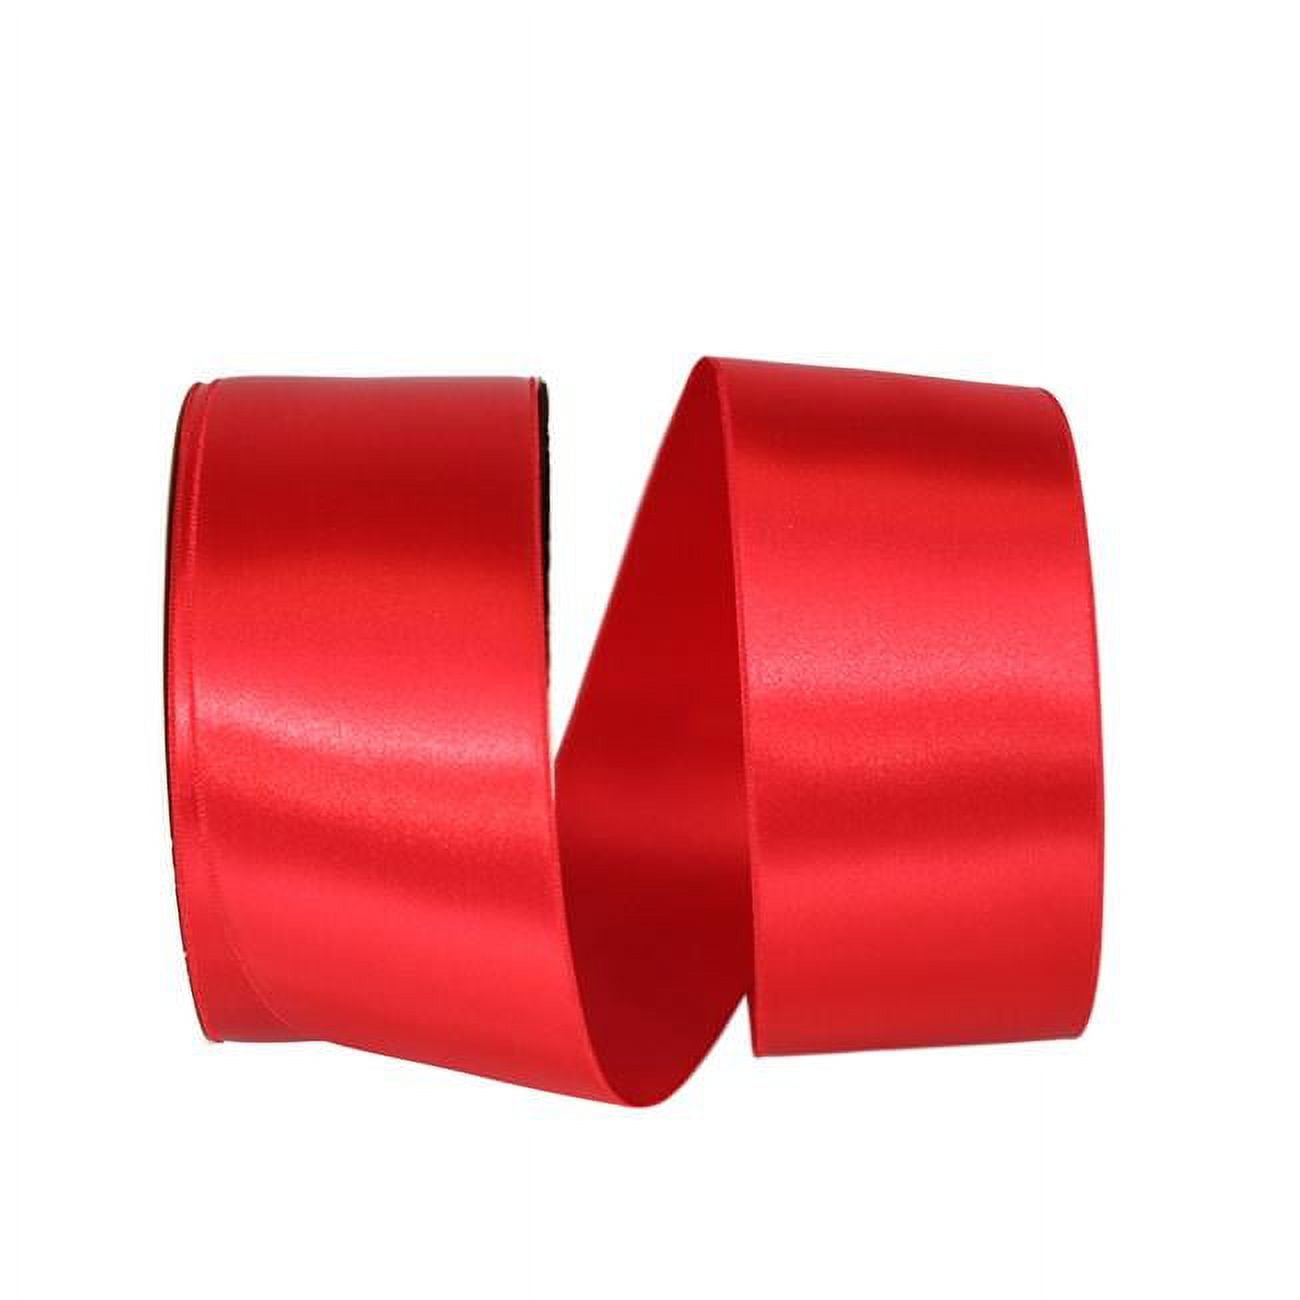 Topenca Supplies 1/4 Inches x 50 Yards Double Face Solid Satin